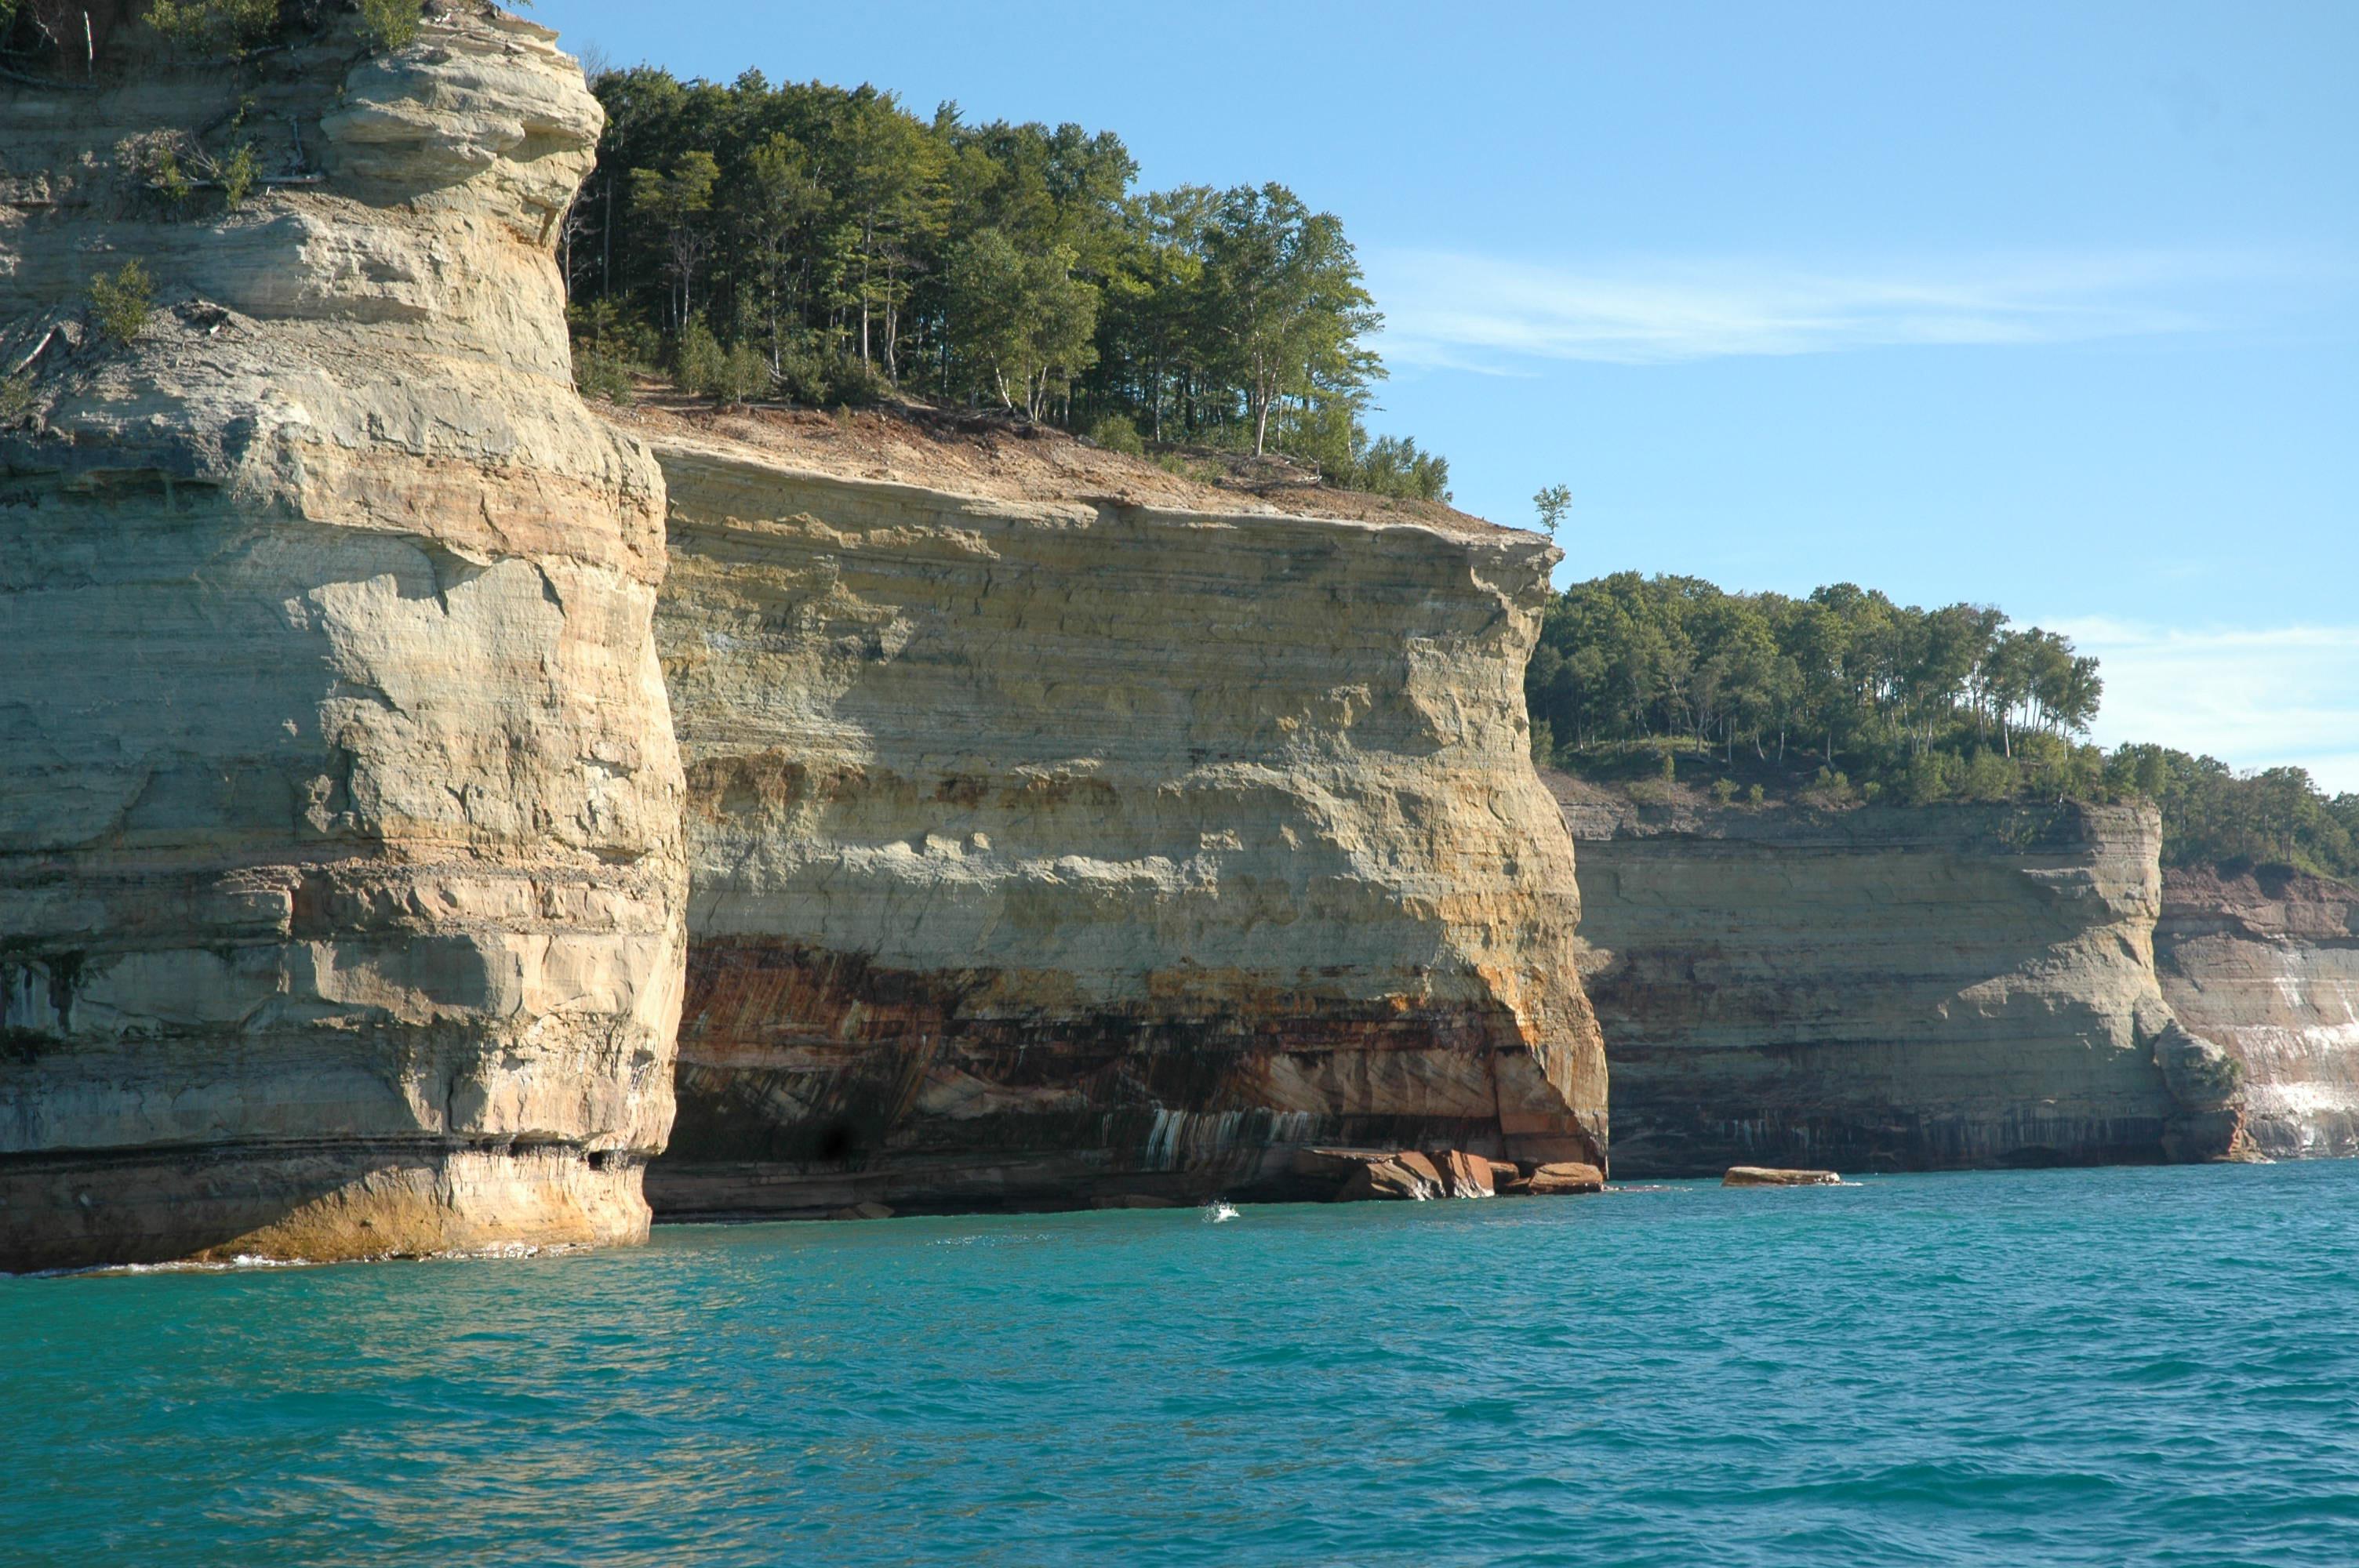 Three sections of cliffs sticking out into Lake Superior like the bows of battleships.